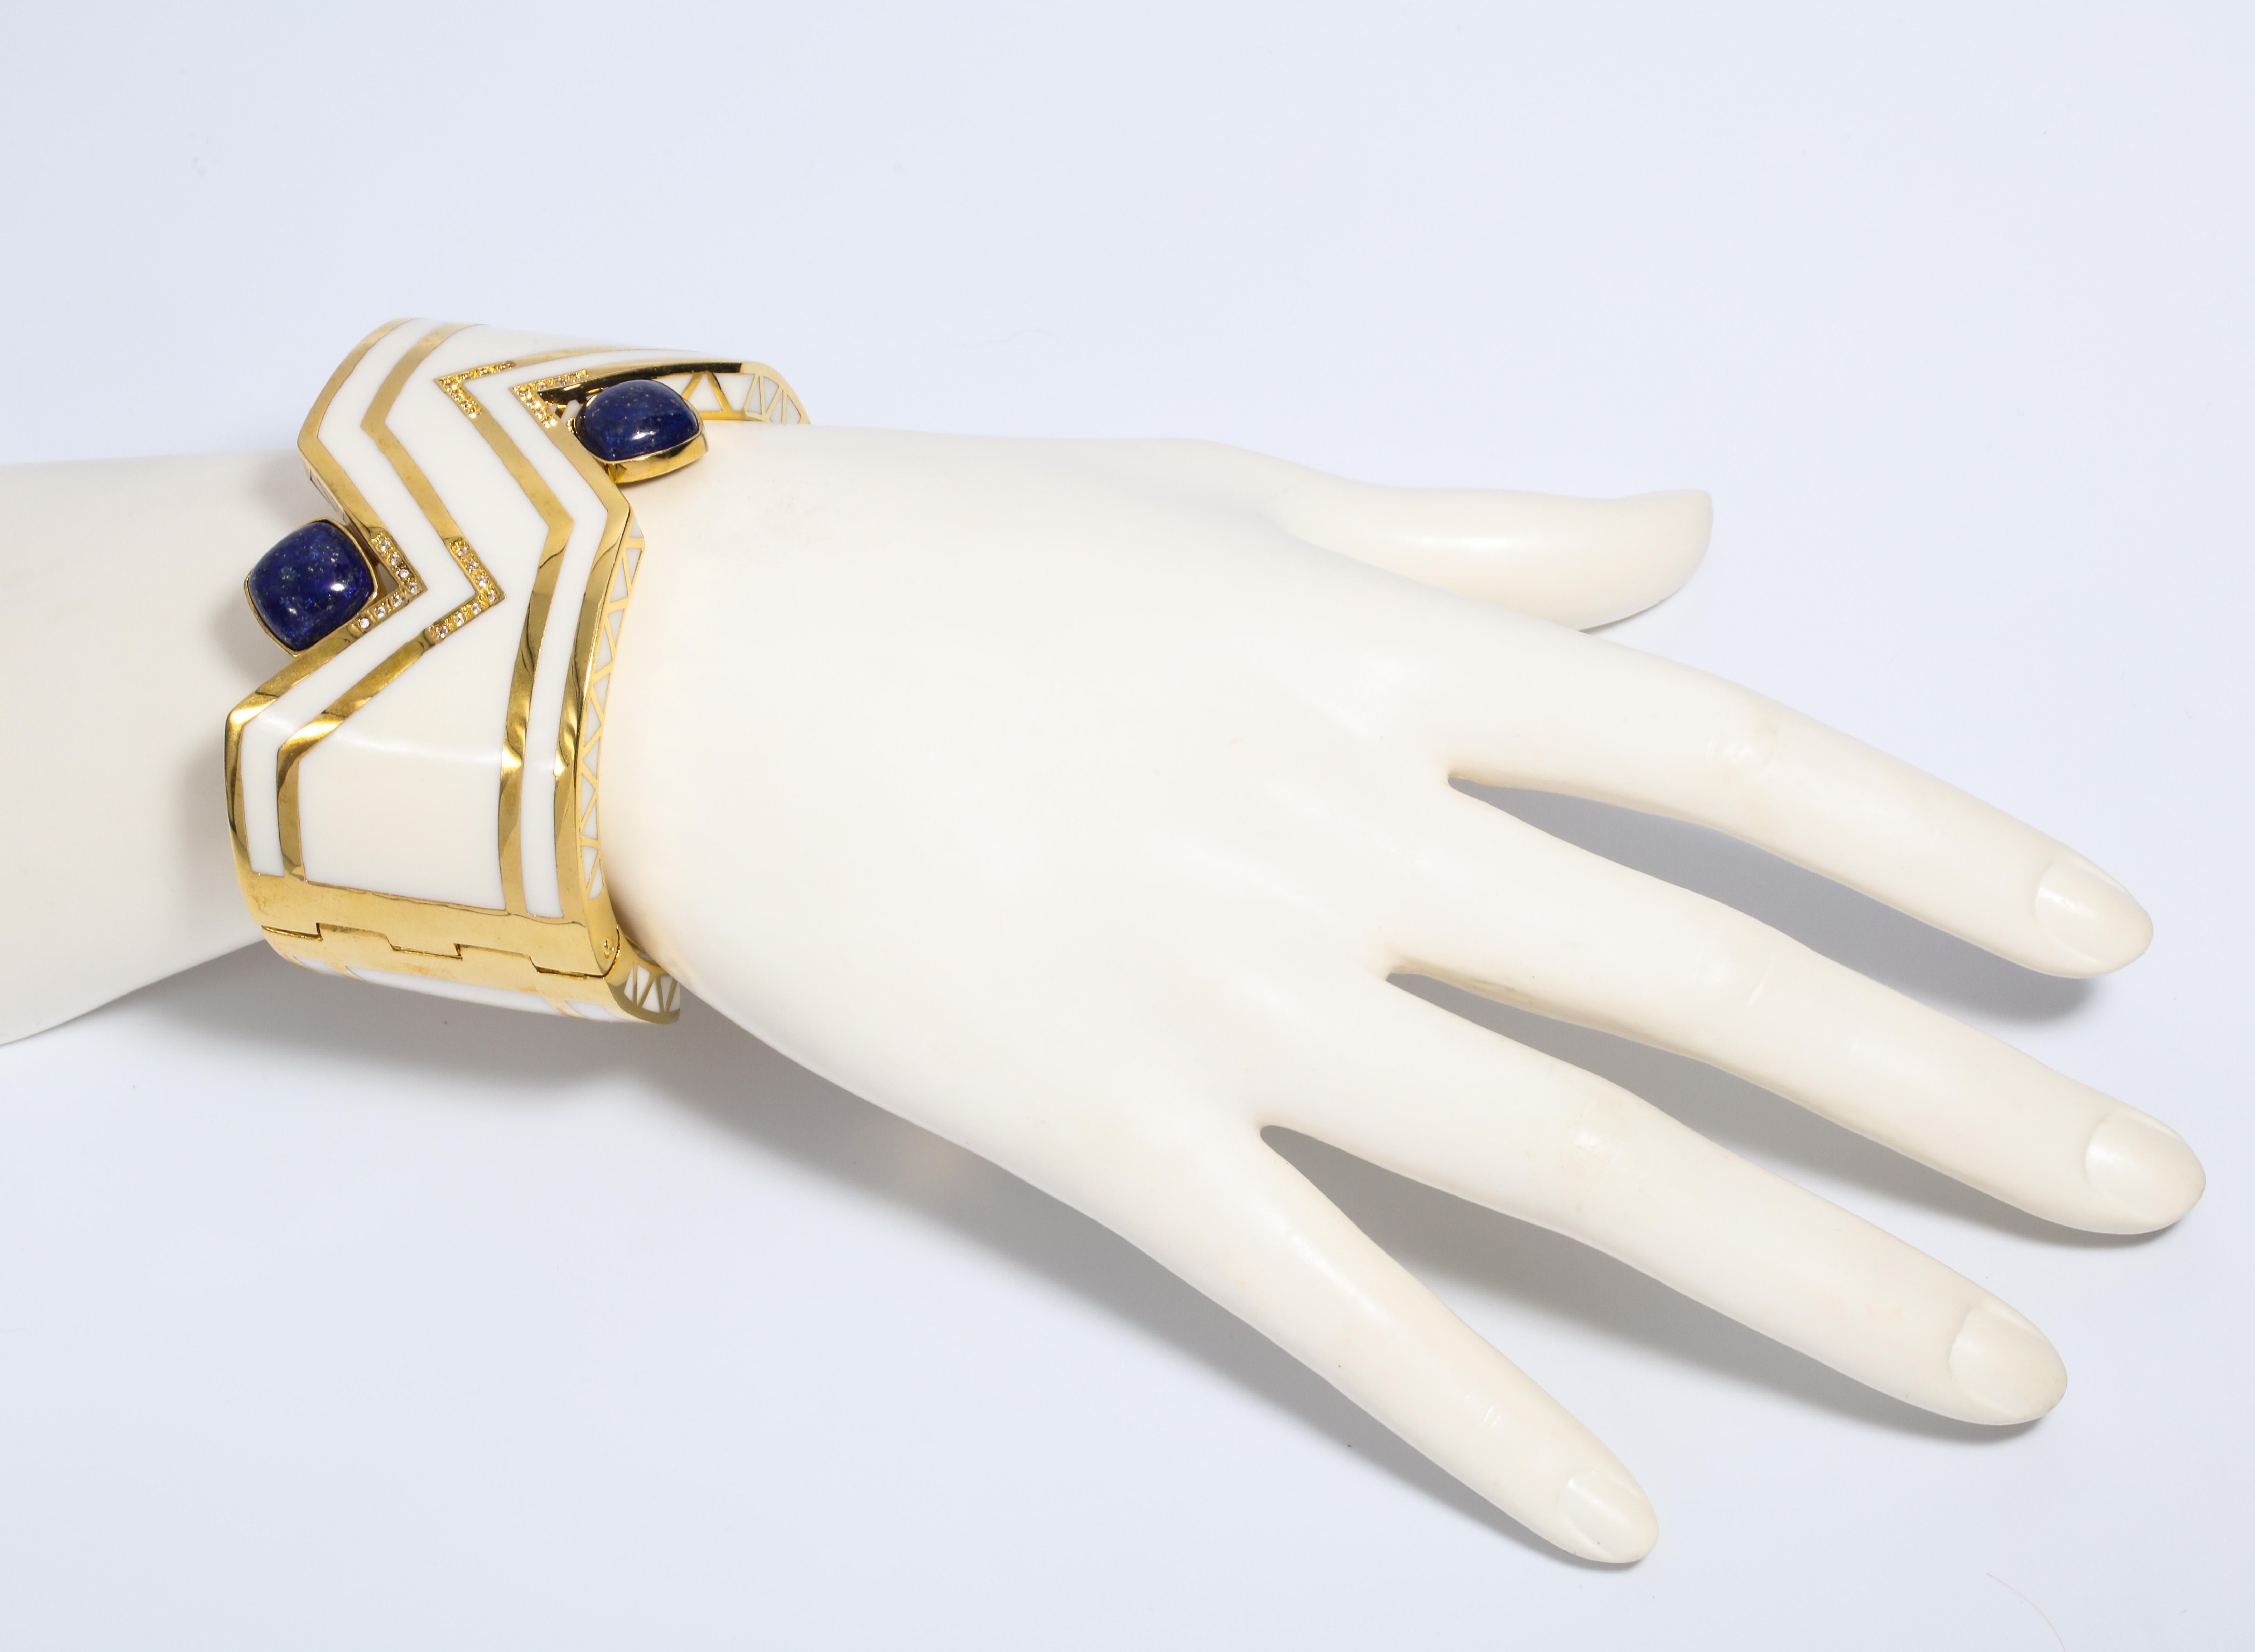 Magnificent Costume Jewelry Art Deco Style Palm Beach Enamel Large Cuff Bangle Cream Enamel Lapis Lazuli  CZ  Touches 
1.5 inches wide Easy firm sprung opening fits 7 inch wrist